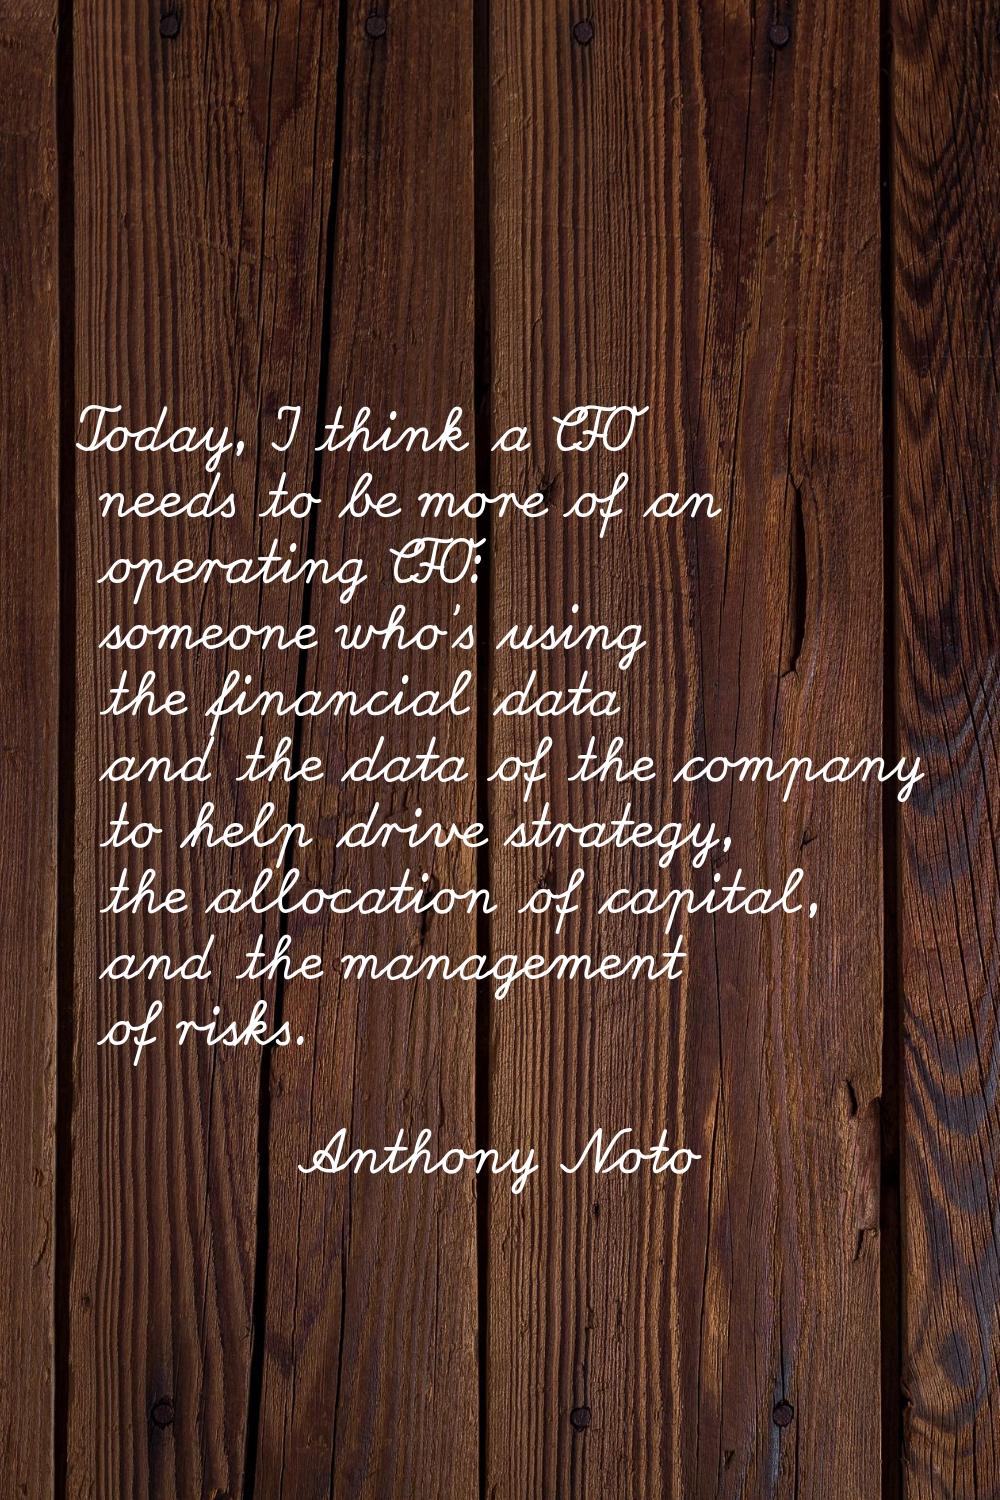 Today, I think a CFO needs to be more of an operating CFO: someone who's using the financial data a